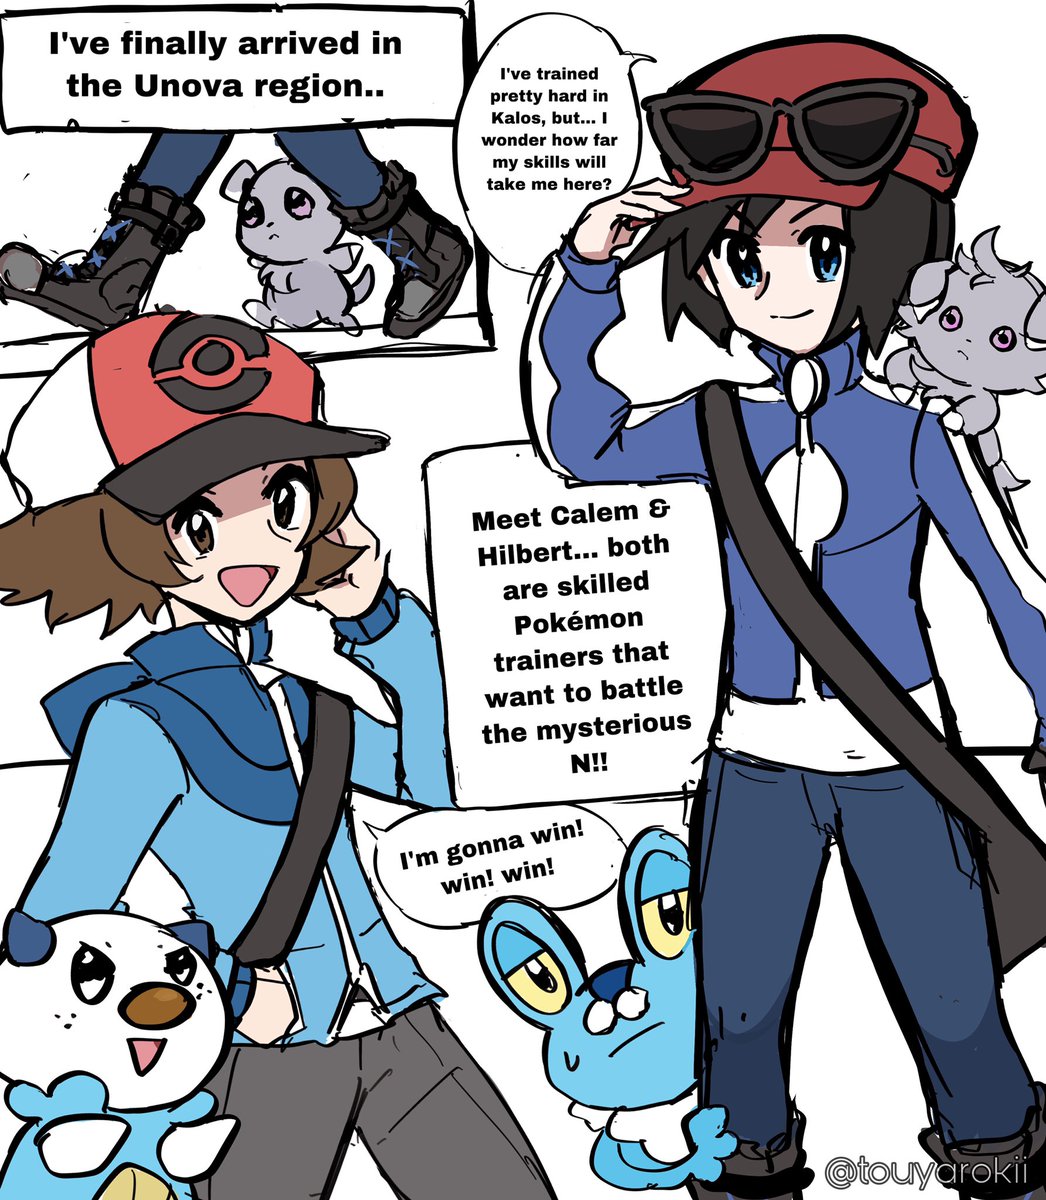 I've always wanted to make Pokémon comics with the trainers so… here's a wip: 